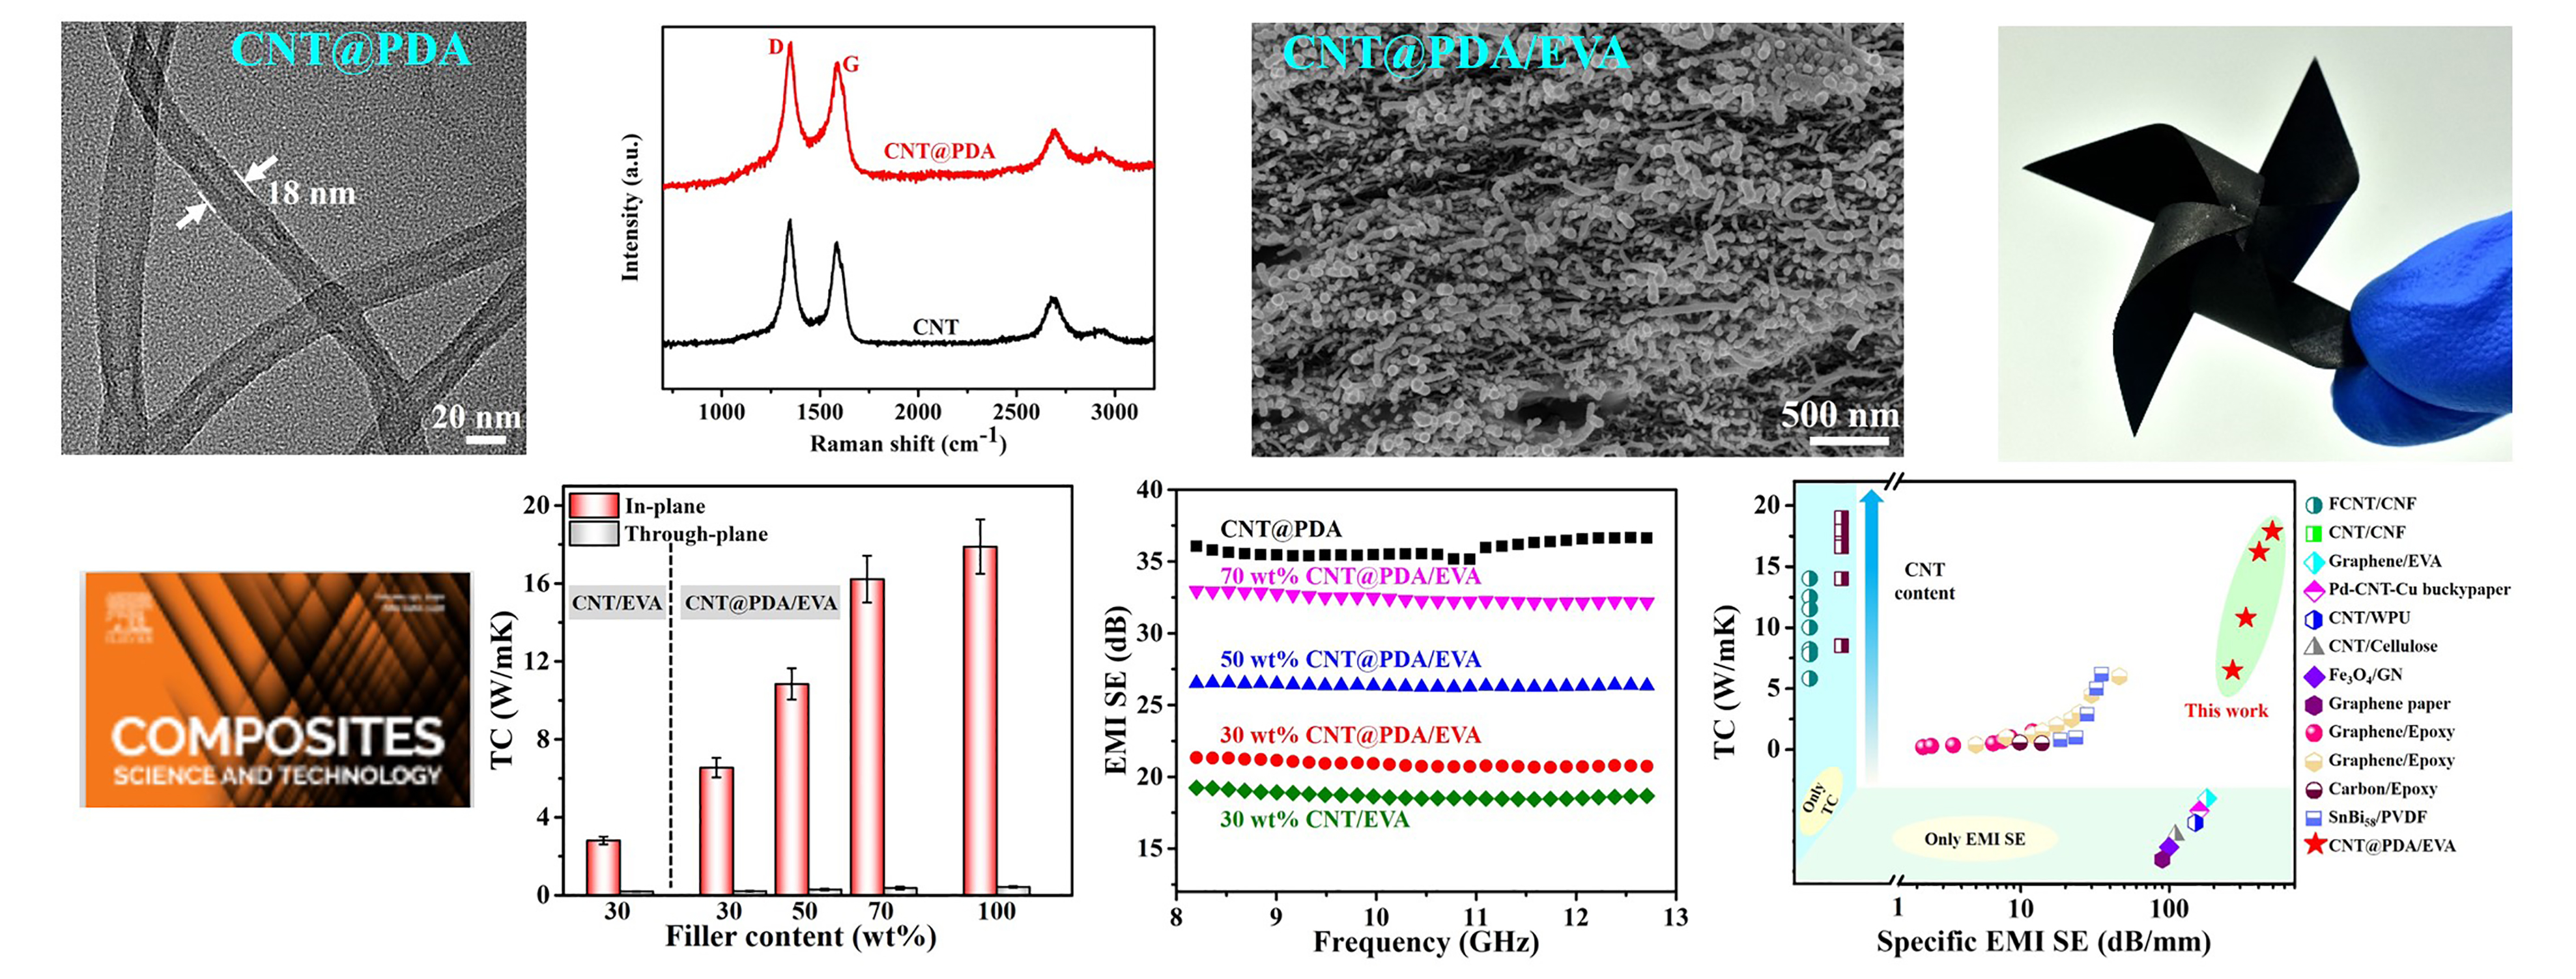 Achieving excellent thermally conductive and electromagnetic shielding performance by nondestructive functionalization and oriented arrangement of carbon nanotubes in composite films.